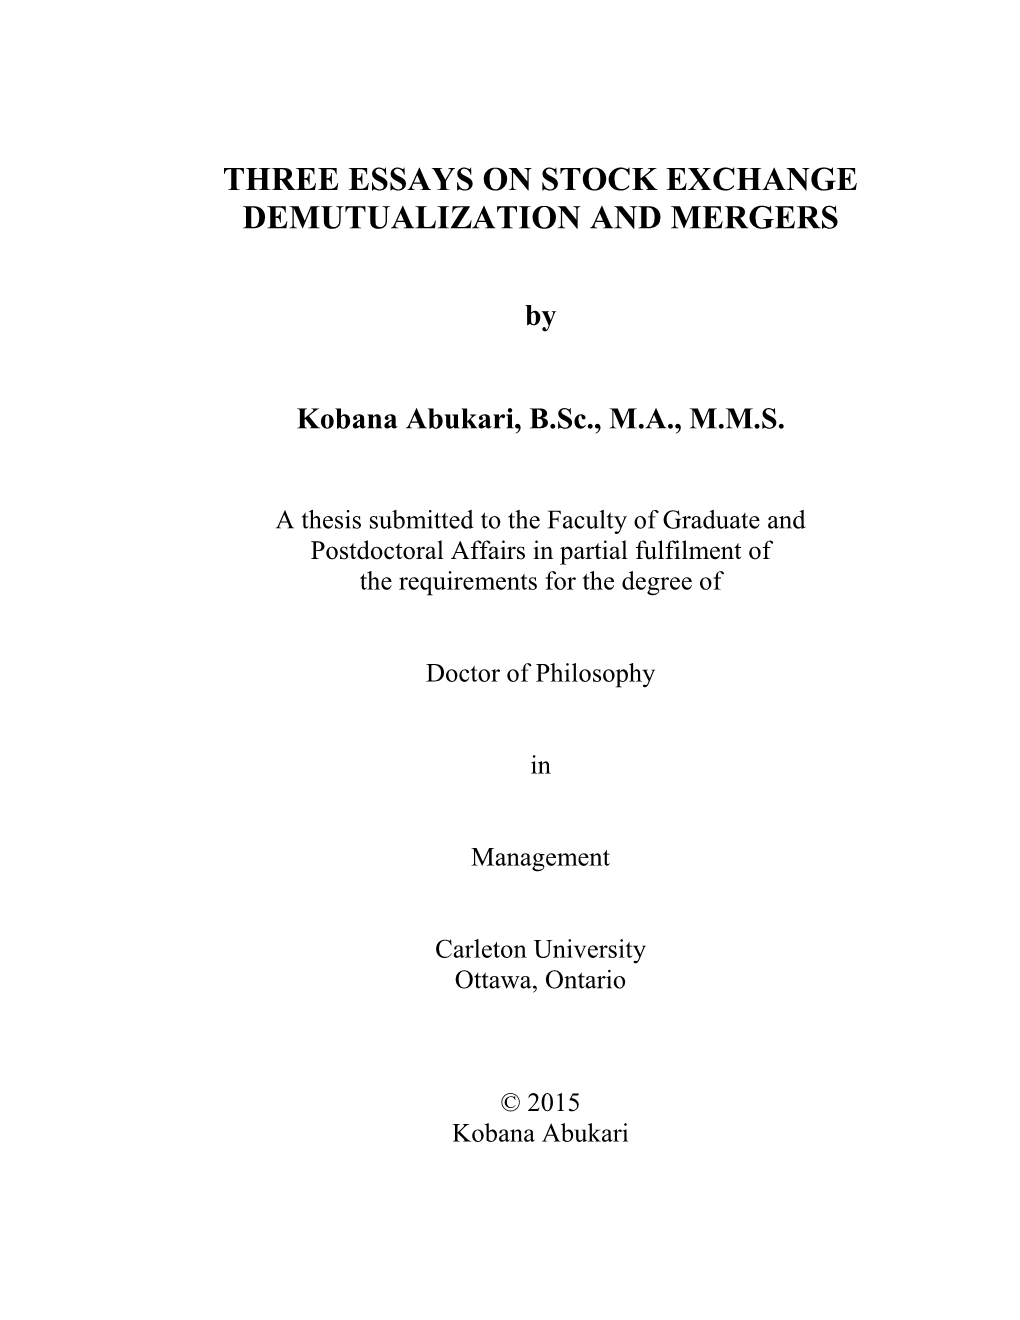 Three Essays on Stock Exchange Demutualization and Mergers